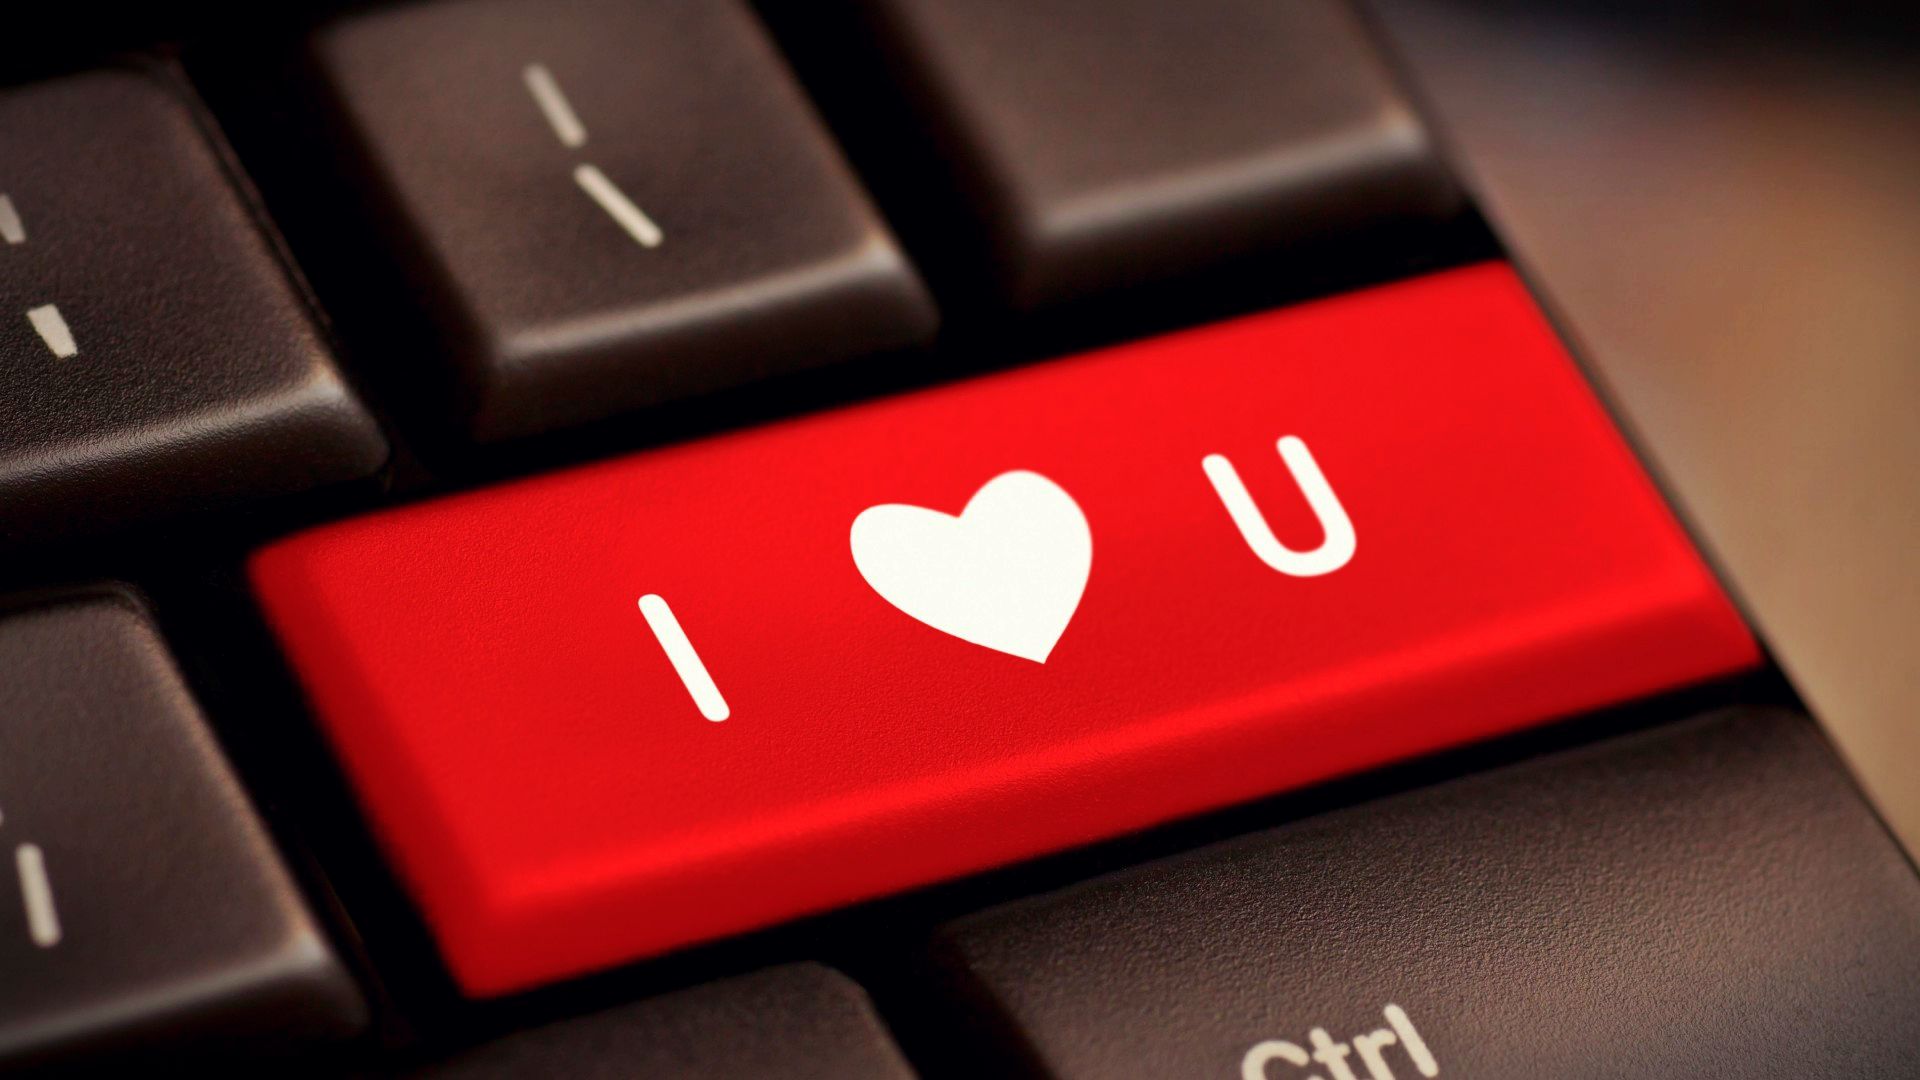 I love you - button on keyboard.